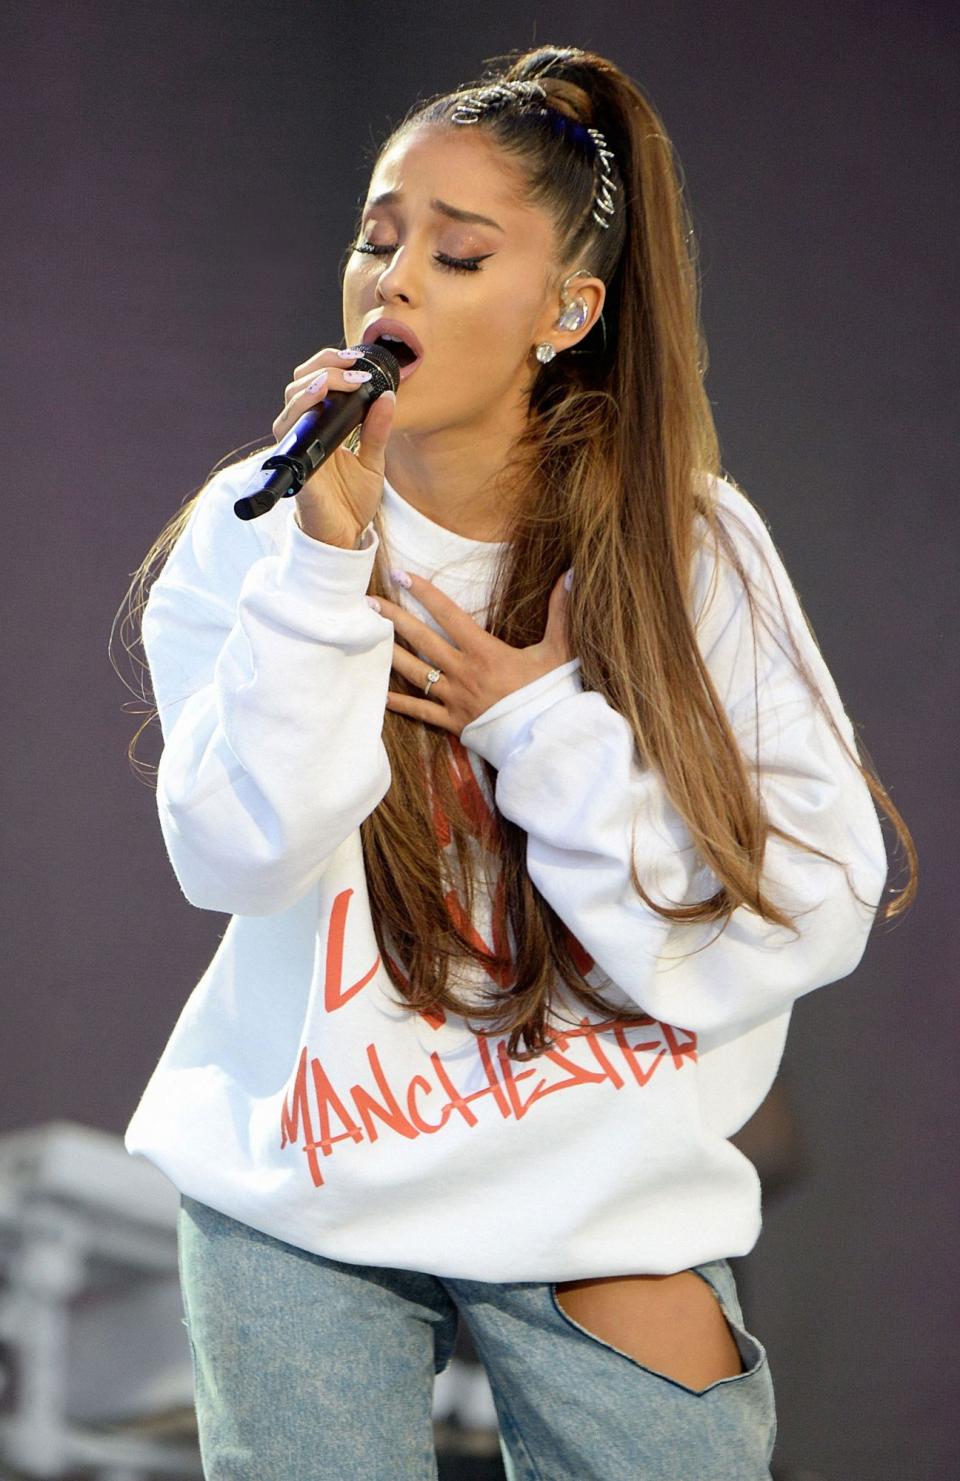 Putting on the One Love Manchester Benefit Concert